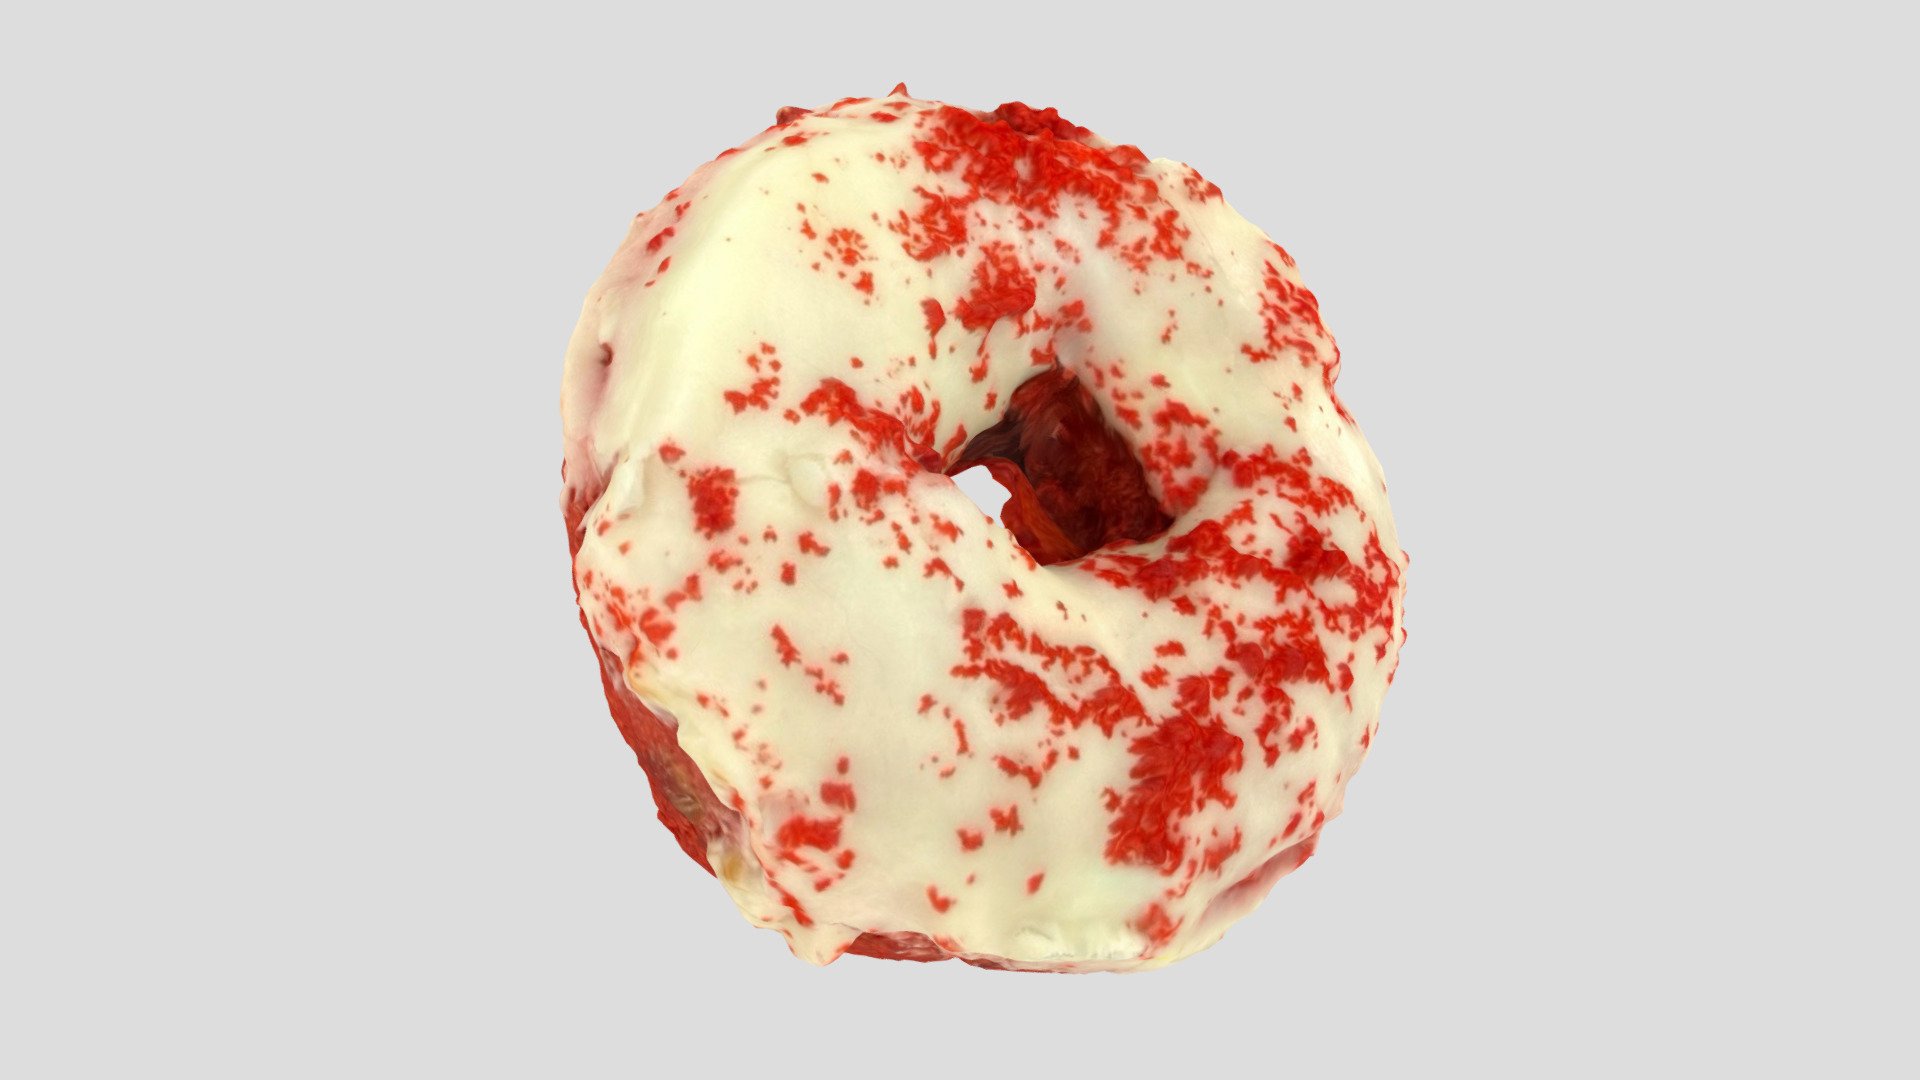 Red velvet donut 3D model scanned using photogrammetry on an iphone. This goes great with coffee, and breakfast or dessert scenes. Suitable for environments, props, etc. Created with Polycam - Red Velvet Donut - 3D model by Cam Cottrill (@camcottrill) 3d model